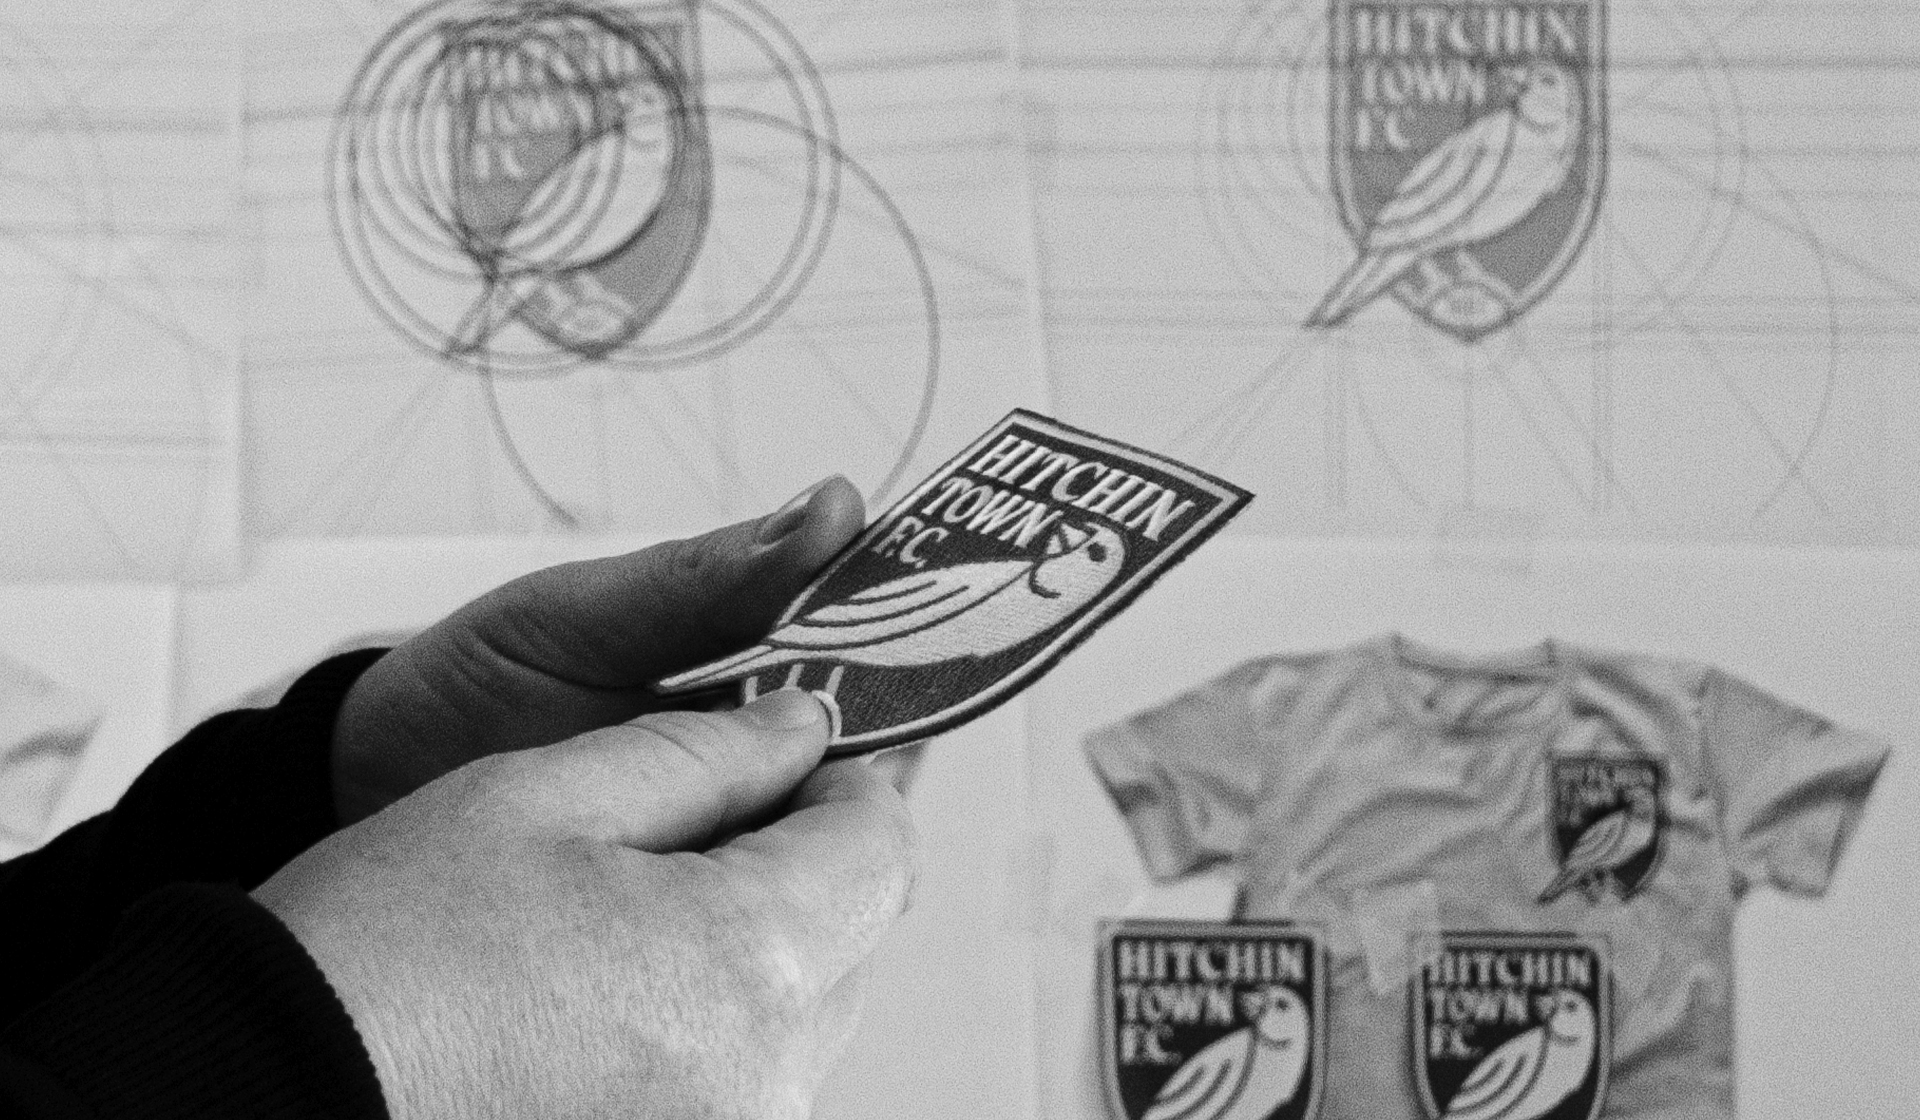 Designing the Hitchin Town FC logo